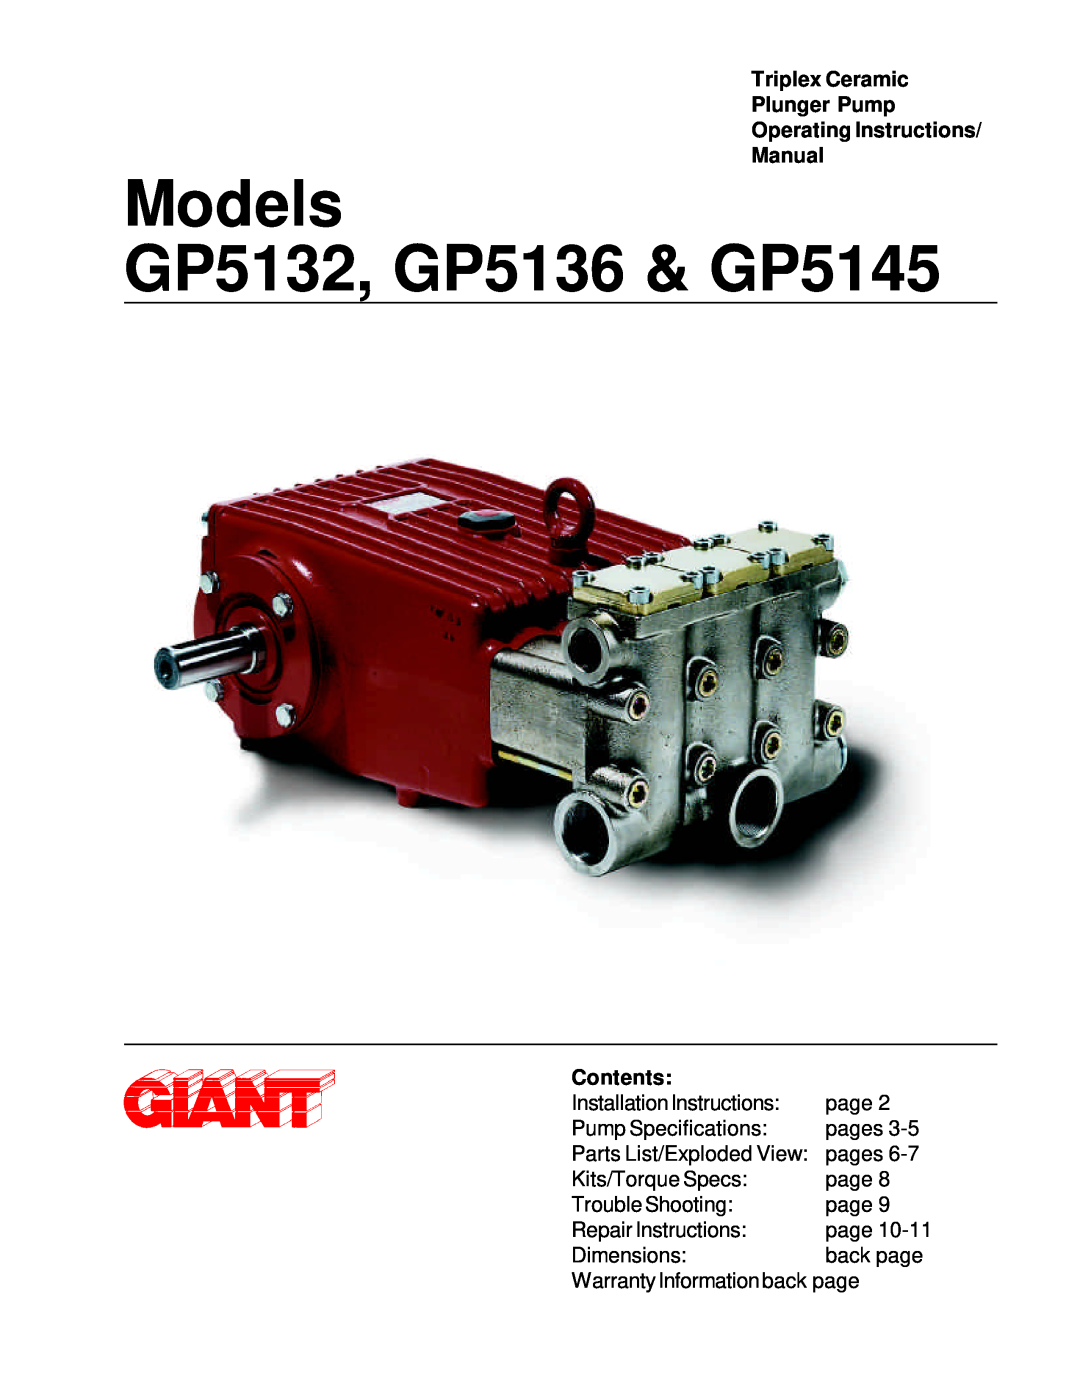 Giant GP5132 installation instructions Triplex Ceramic Plunger Pump, Operating Instructions Manual, Contents 